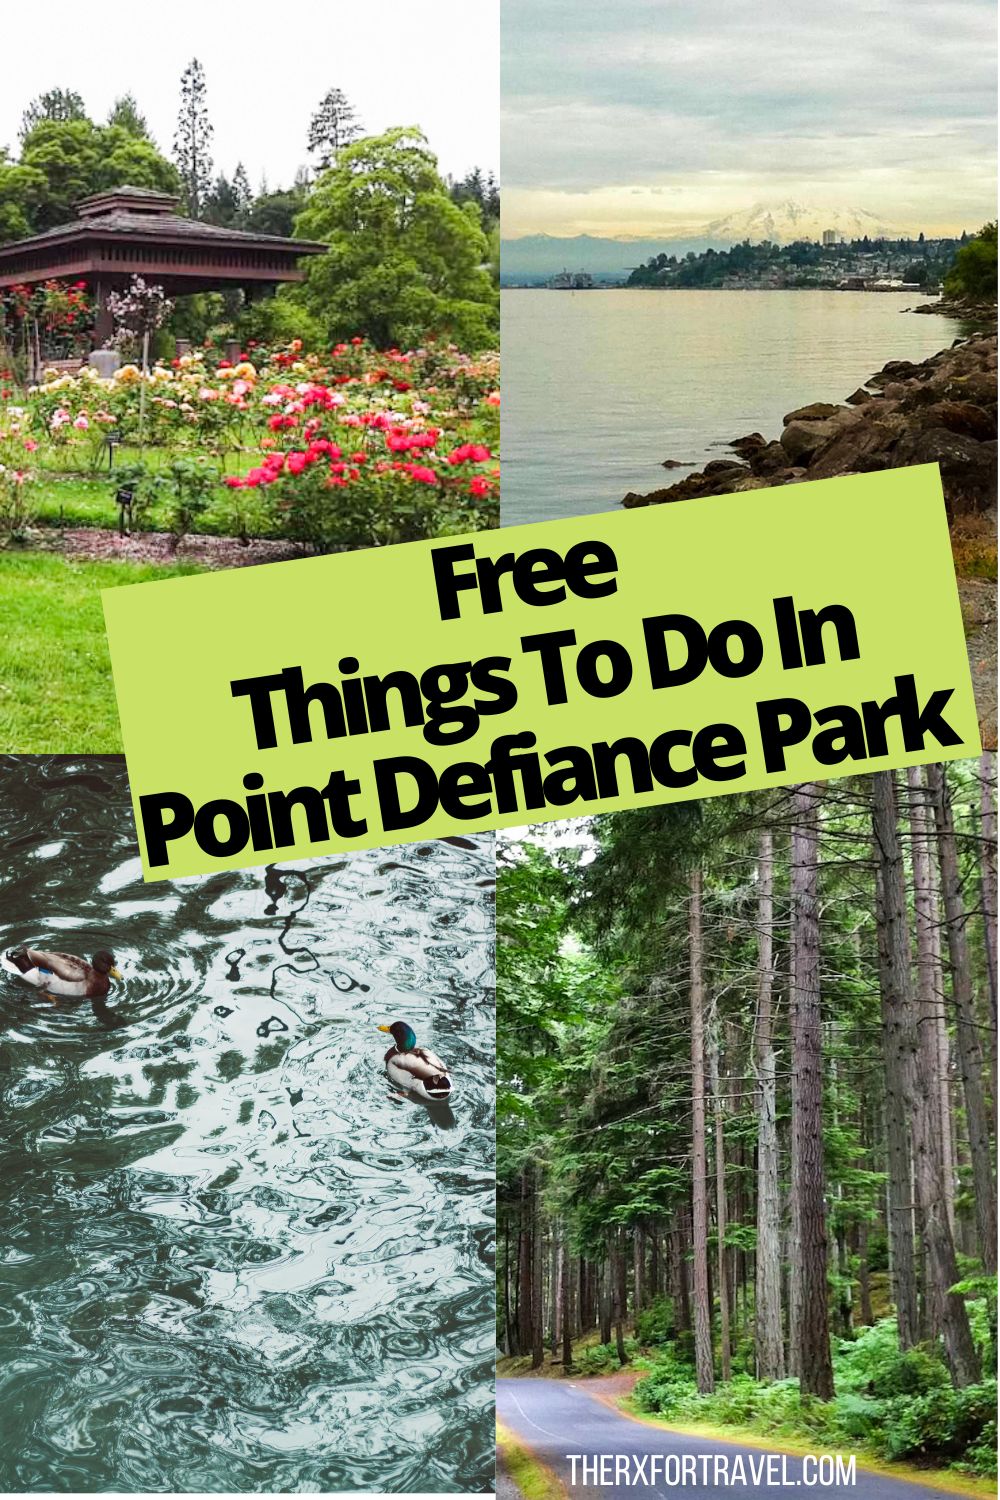 There are so many things to do in Point Defiance Park in Tacoma, Washington. Read the guide for all there is including many free things to do too